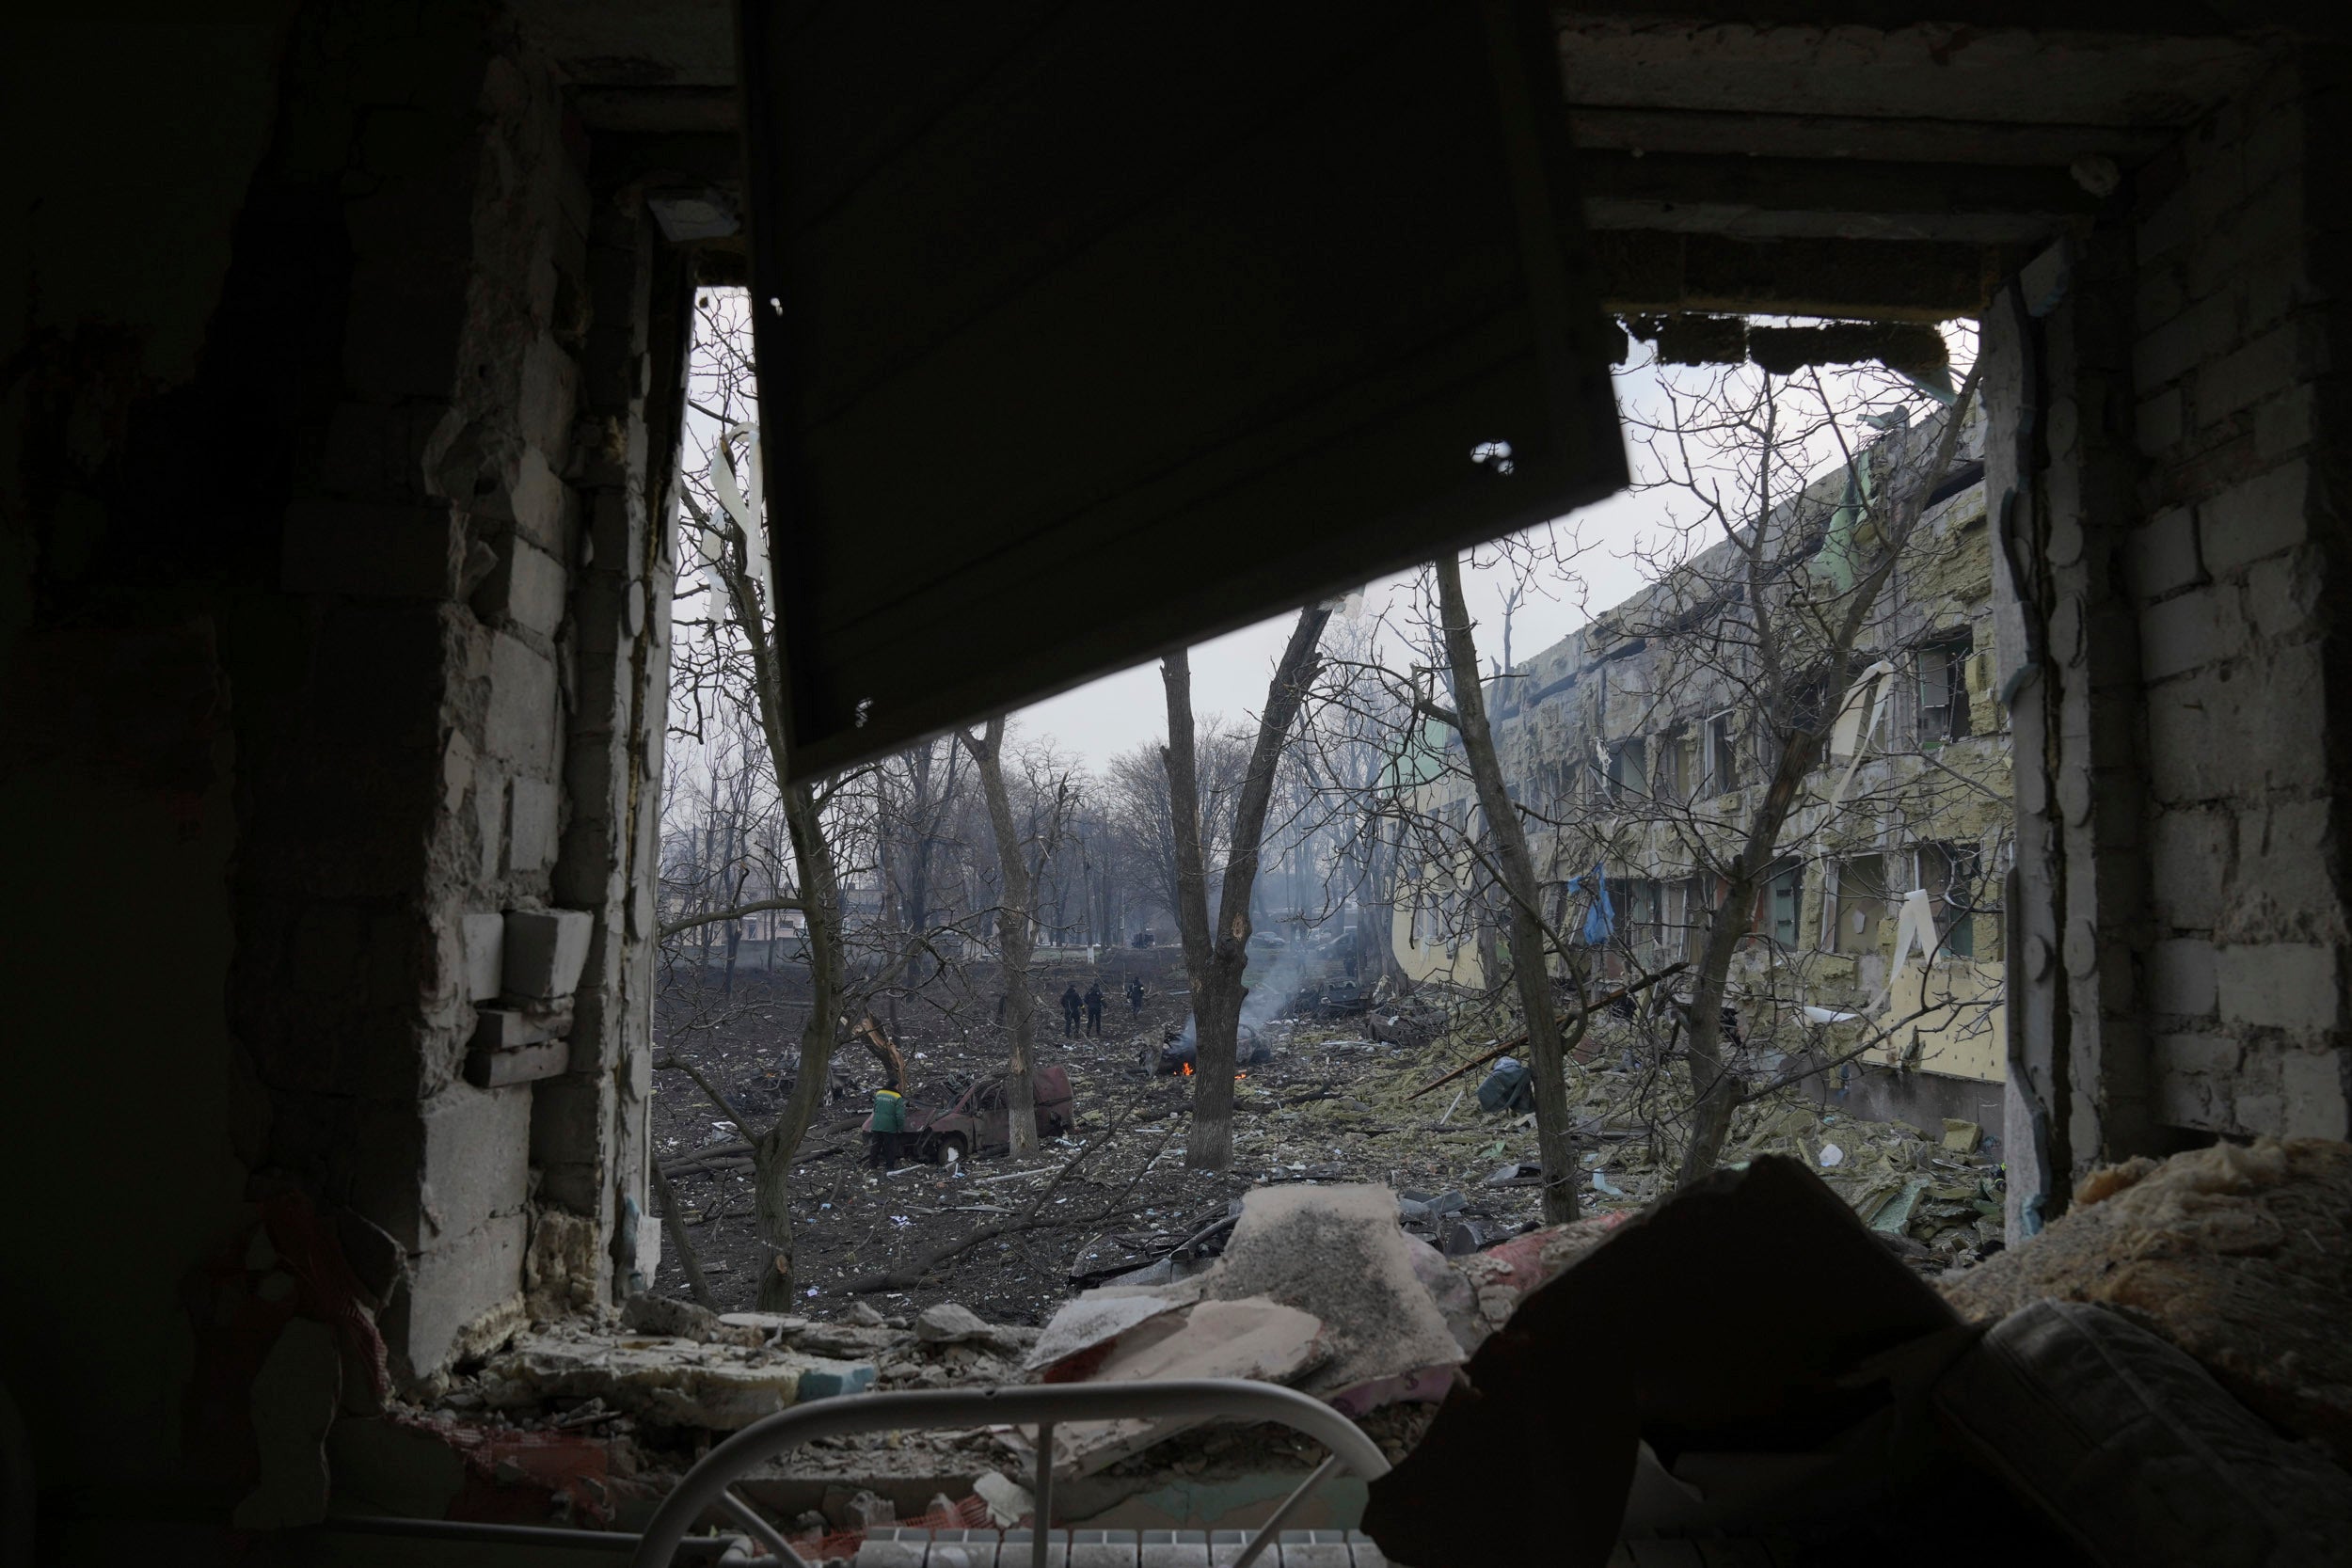 A view onto the yard of a maternity hospital damaged in a shelling attack in Mariupol earlier this month